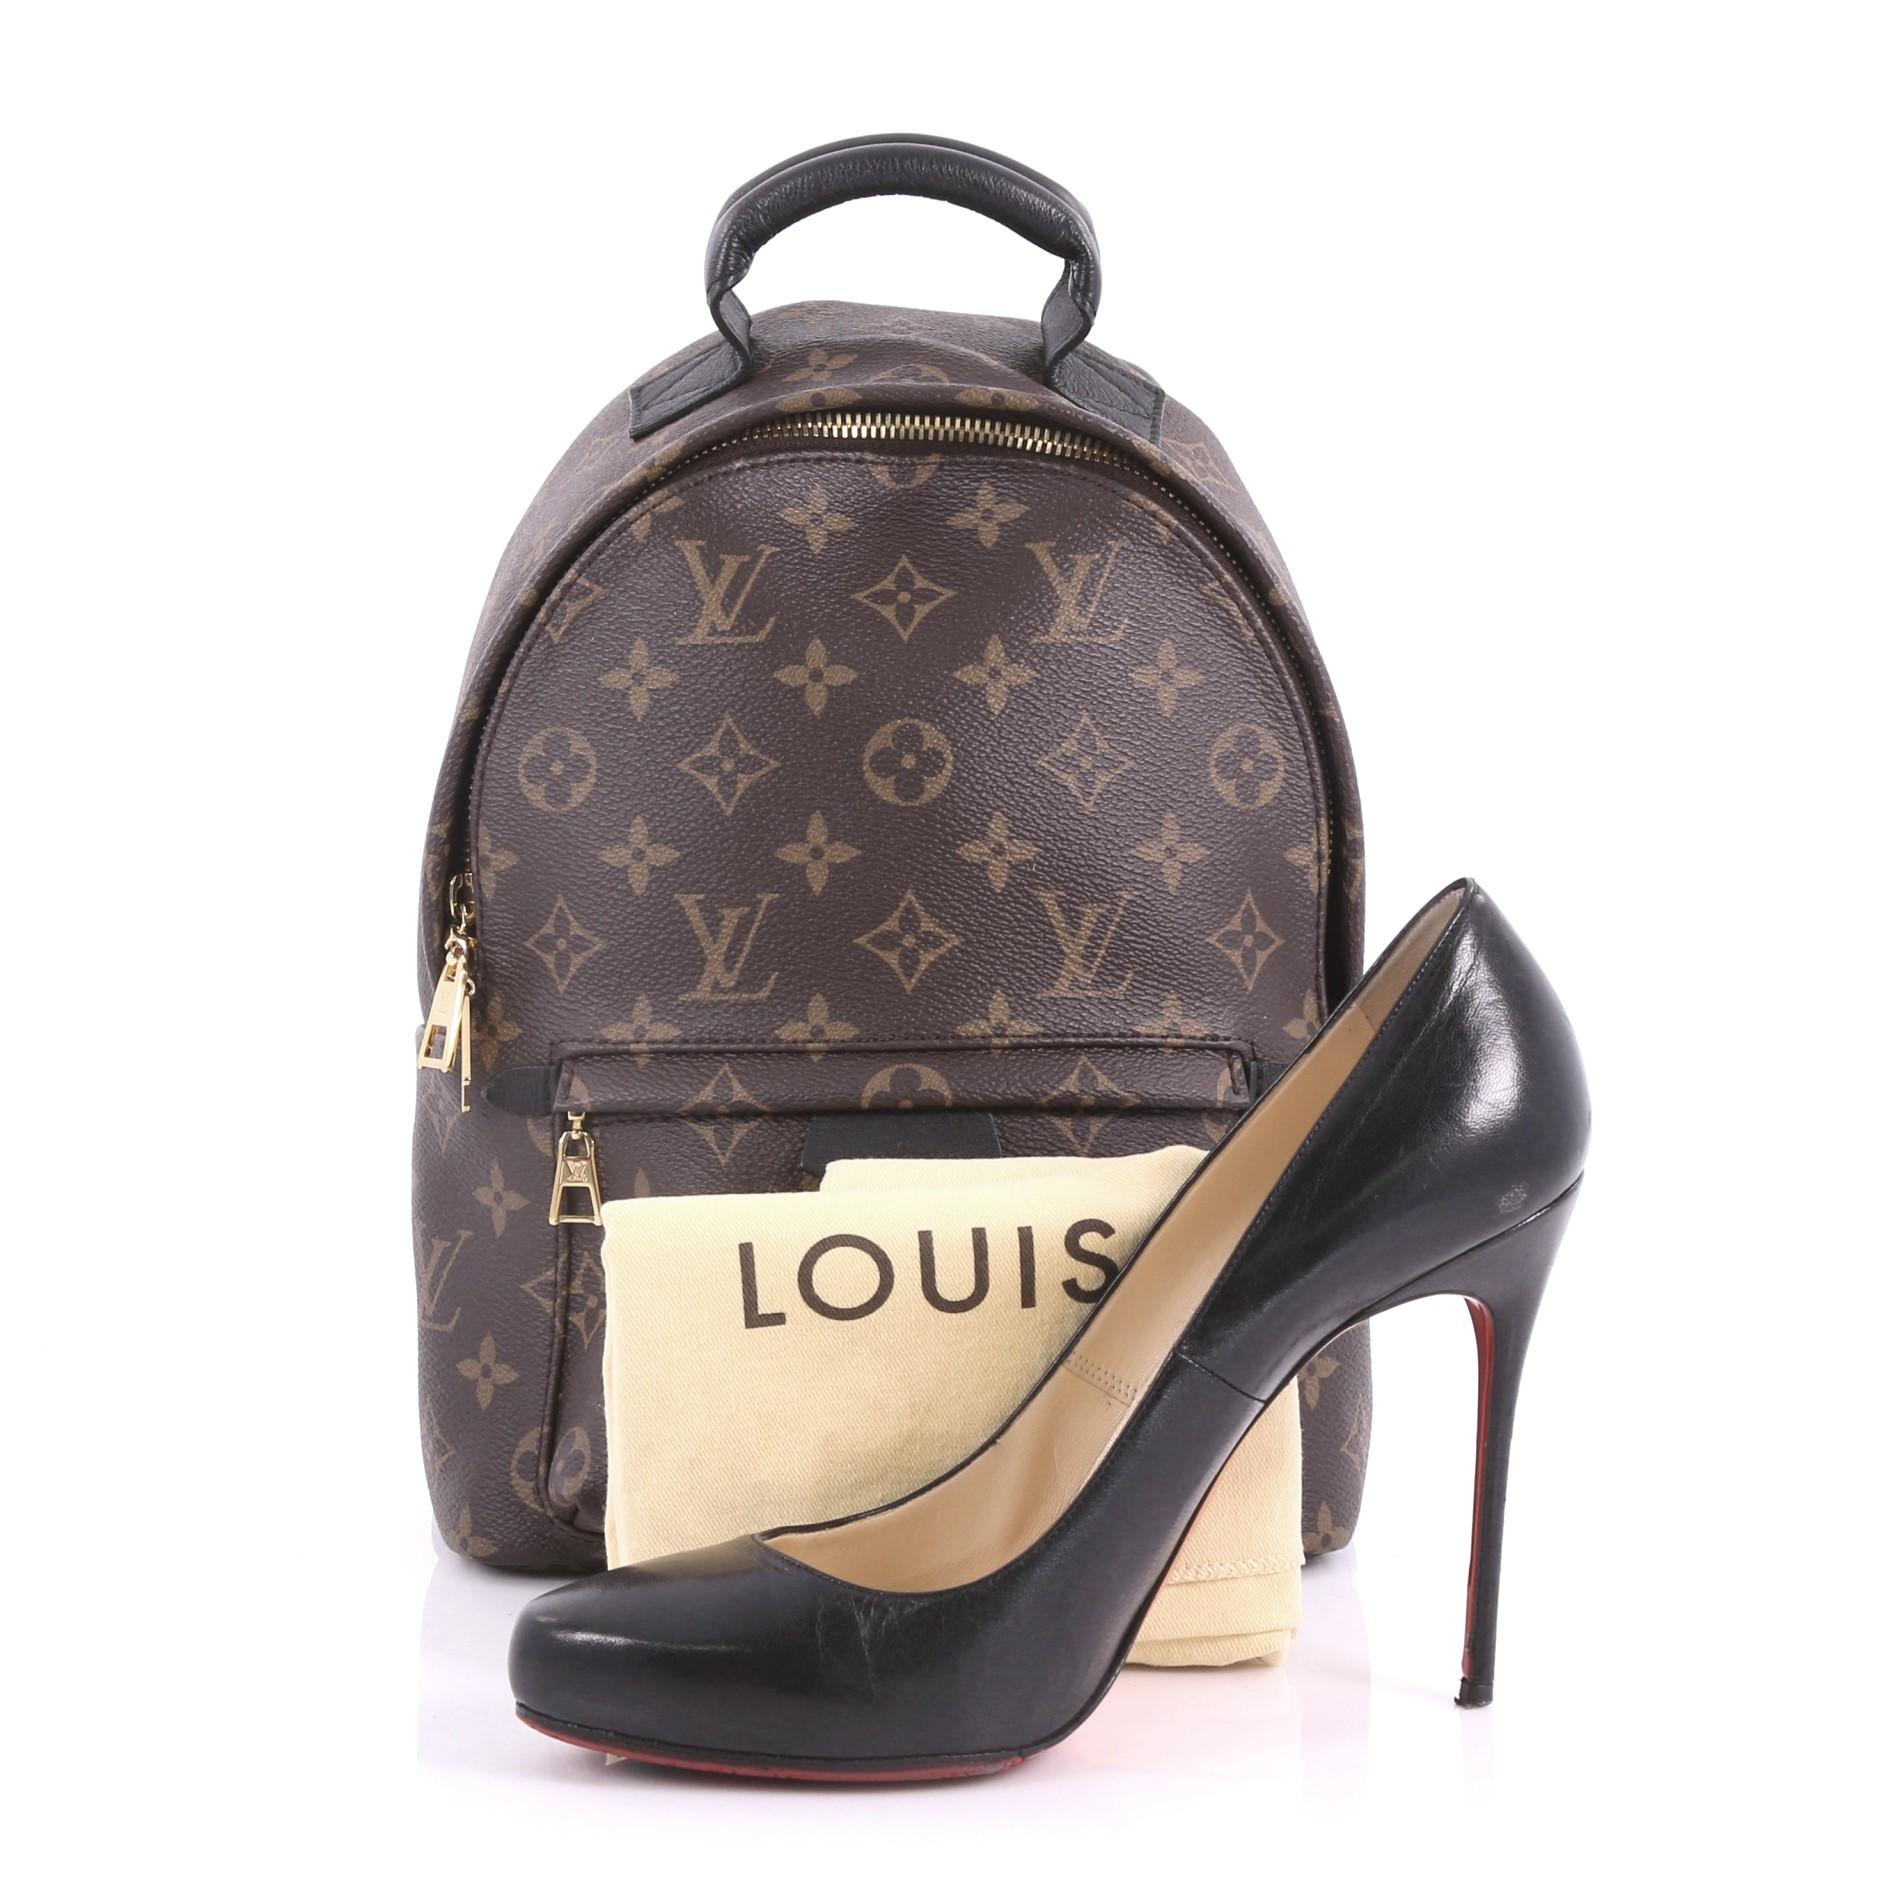 This authentic Louis Vuitton Palm Springs Backpack Monogram Canvas PM is a standout from the brand's collection made for care-free urban fashionistas. Crafted from brown monogram coated canvas, this functional backpack features a padded leather top